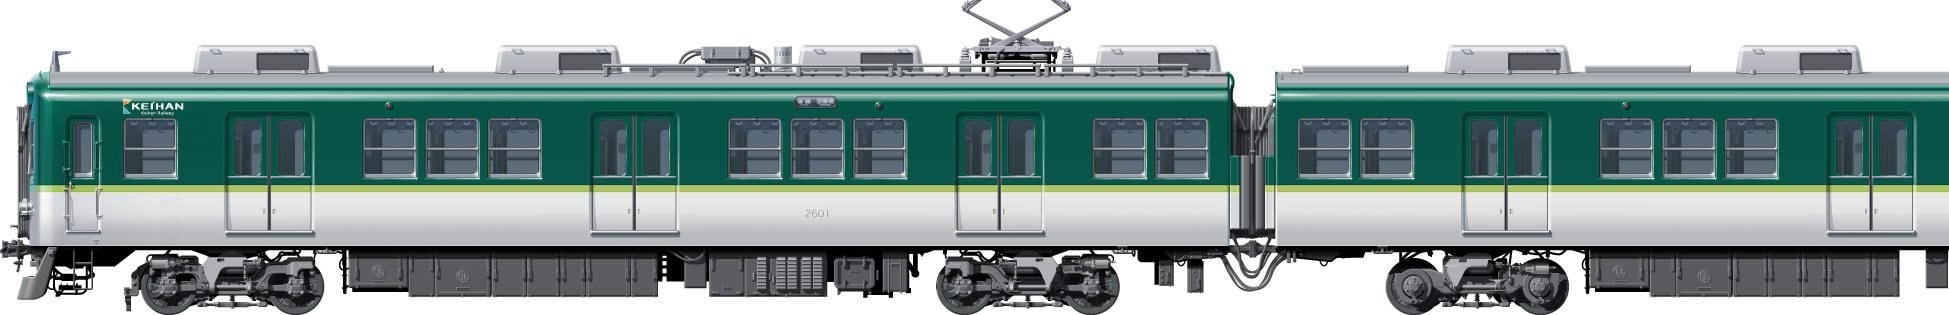 2600n@ʃCXg@ʃCXg@tgr[CXg@TChr[CXg@CXg@dS@2000n@X[p[J[@keihan Railway illustration  front view@sideview front view